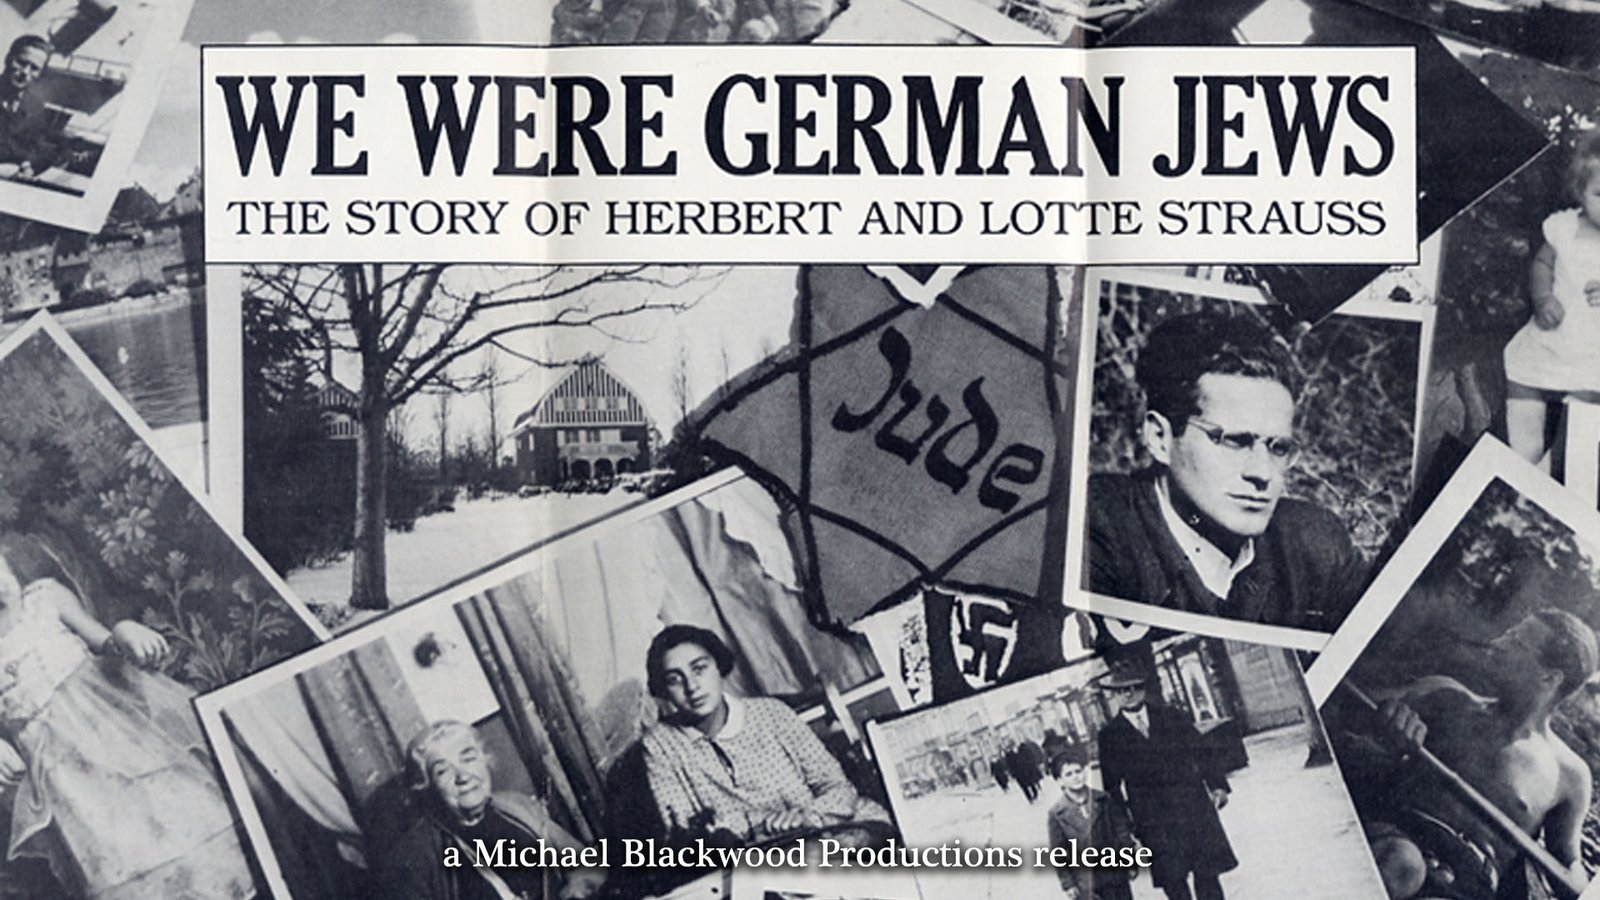 We Were German Jews - Herbert and Lotte Strauss's Story of Escaping the Holocaust